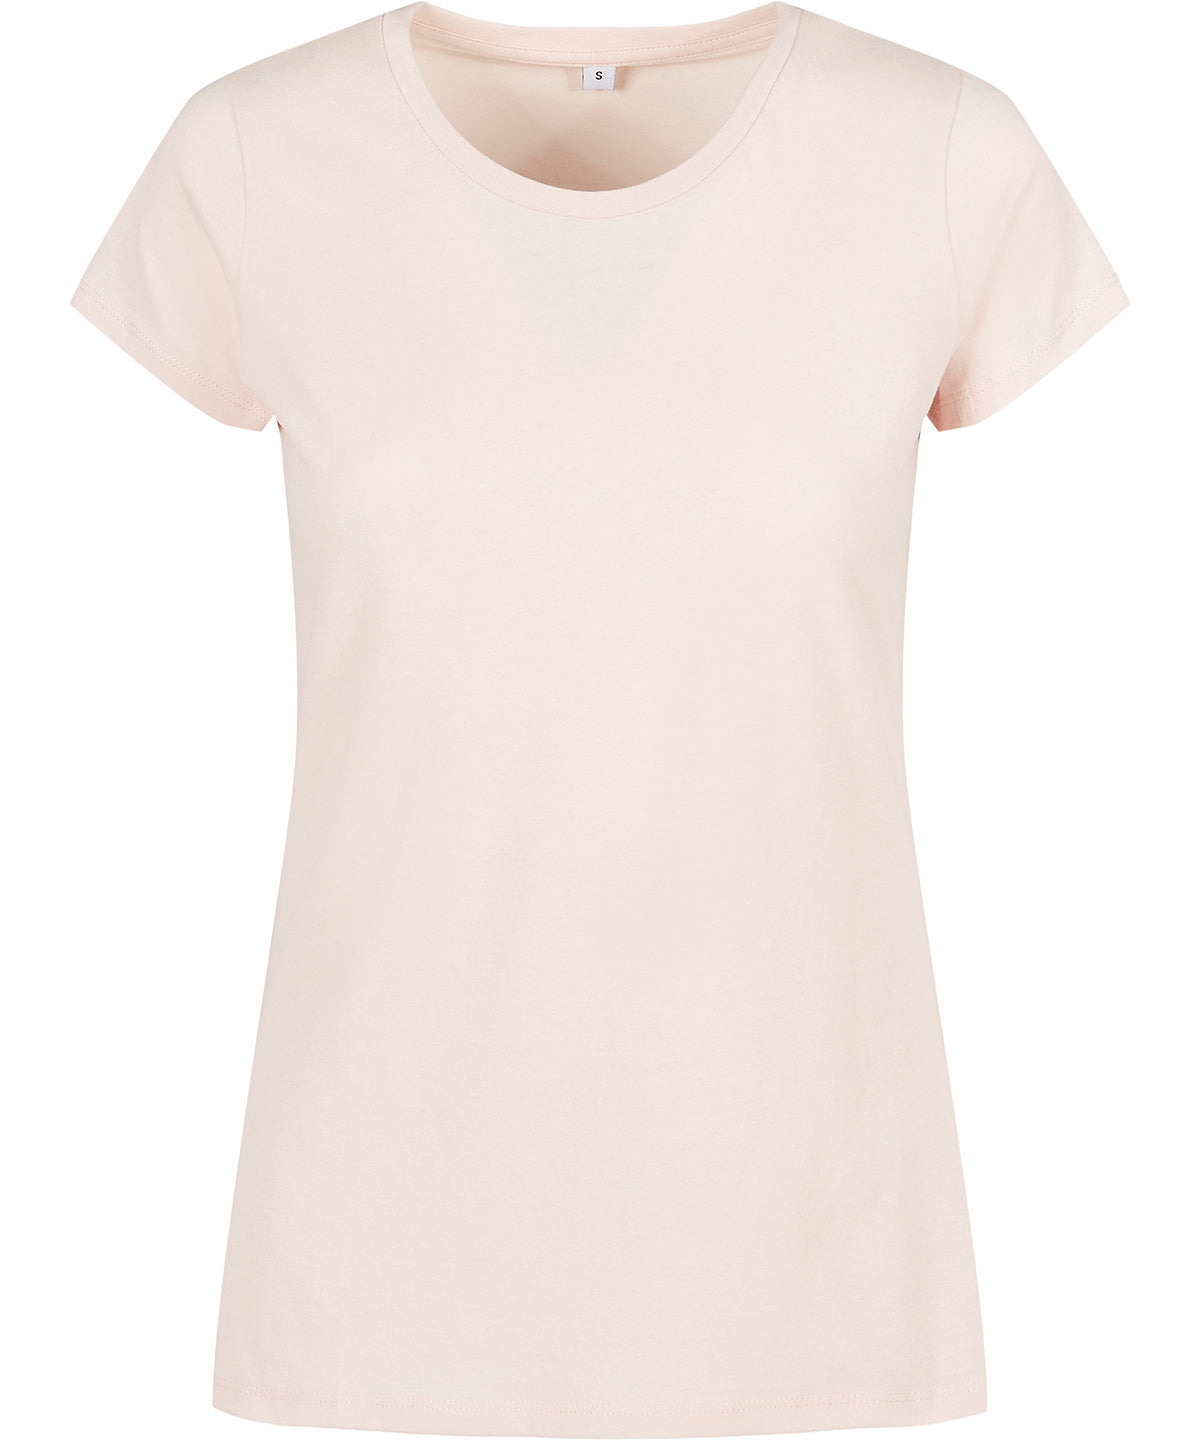 Build Your Brand Basic Womens Basic Tee Pink